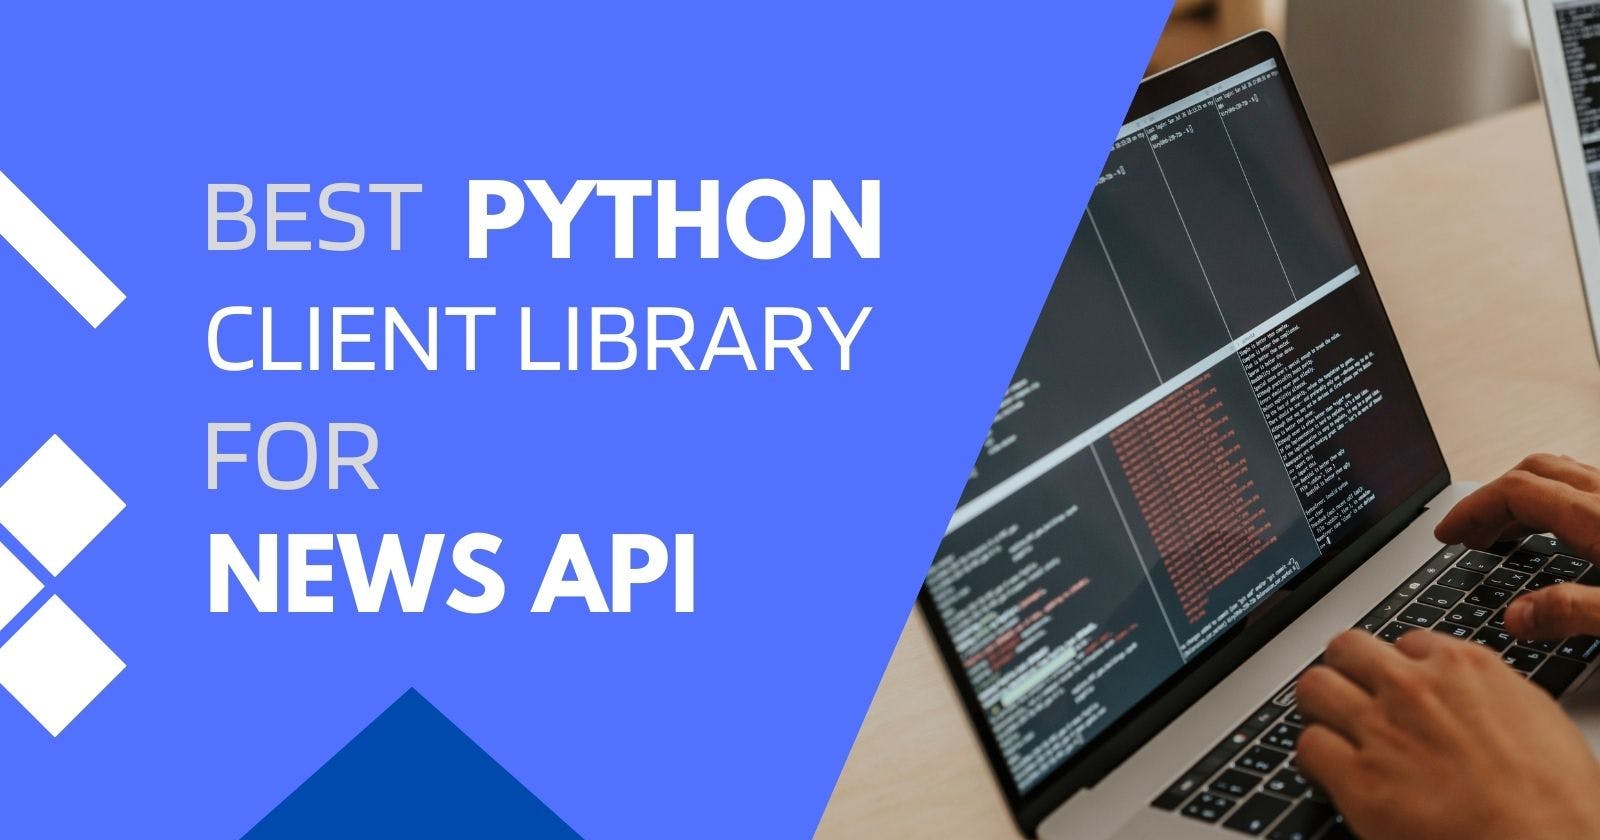 Best Python Client Library for News API